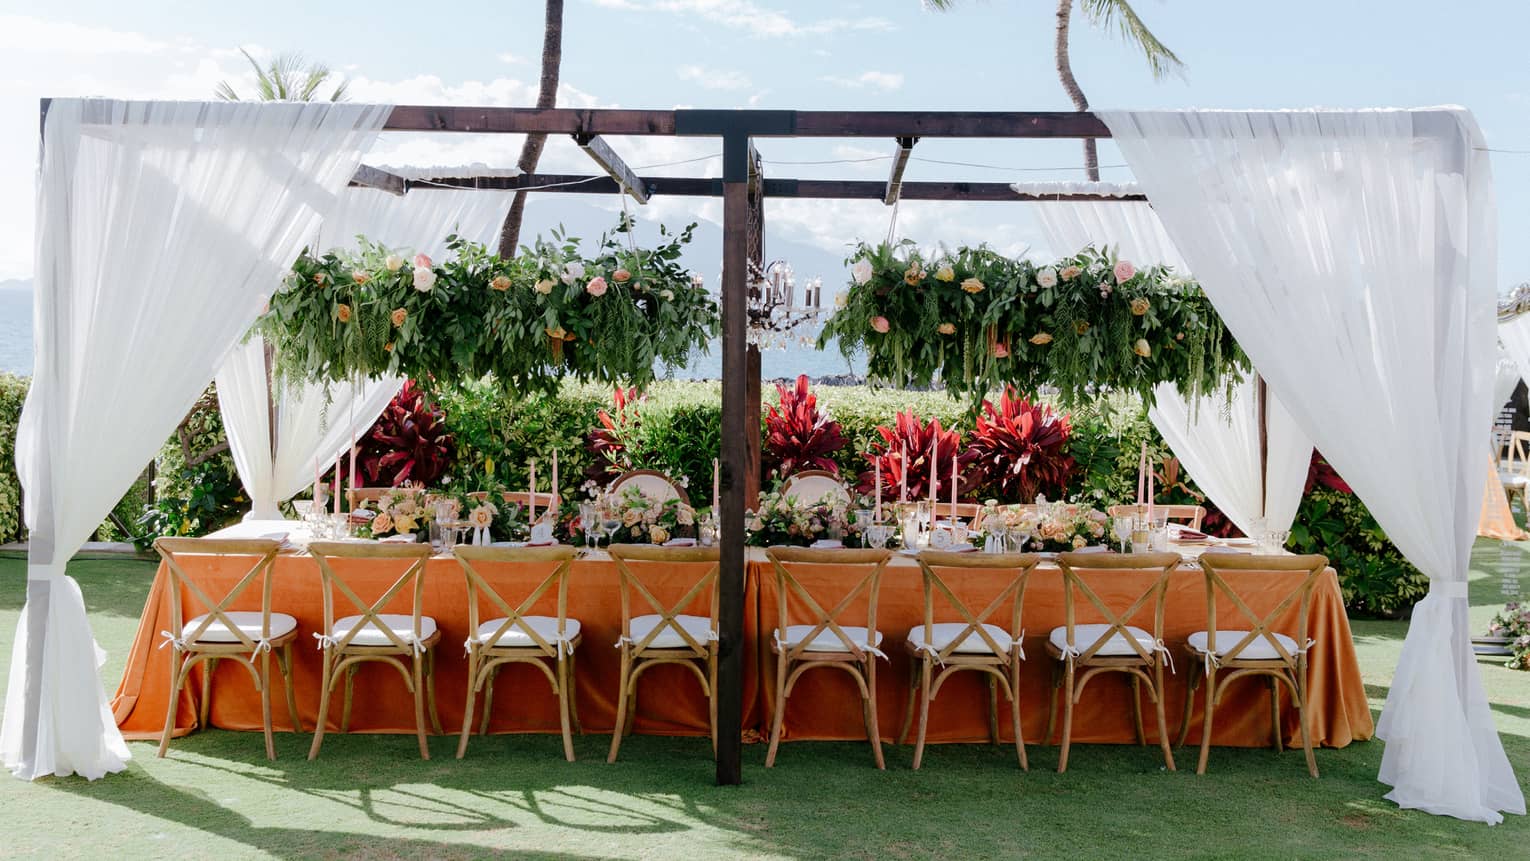 Outdoor wedding reception table under pergola with white curtains